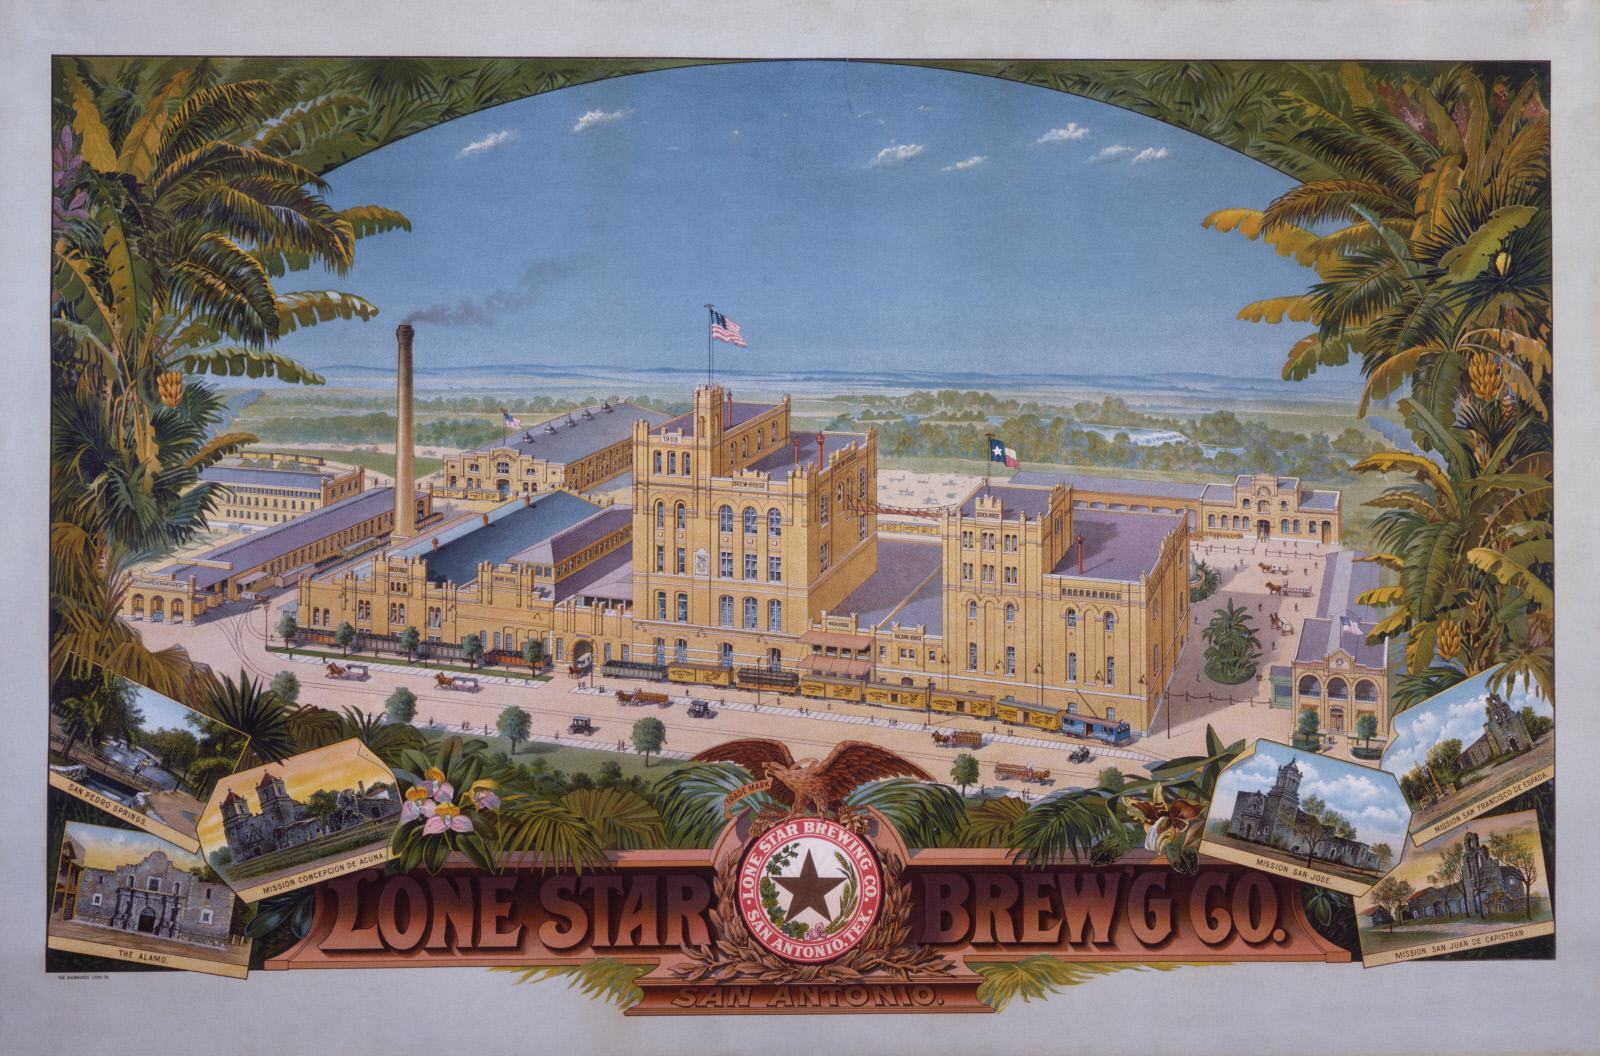 Image Credit: The Milwaukee Lithographing and Engraving Company (American, 1852-1920). Lone Star Brewing Co., San Antonio, 1903. Colored lithograph on paper. 27 x 41 1/2 in. (68.6 x 105.4 cm). Museum purchase, 74.9